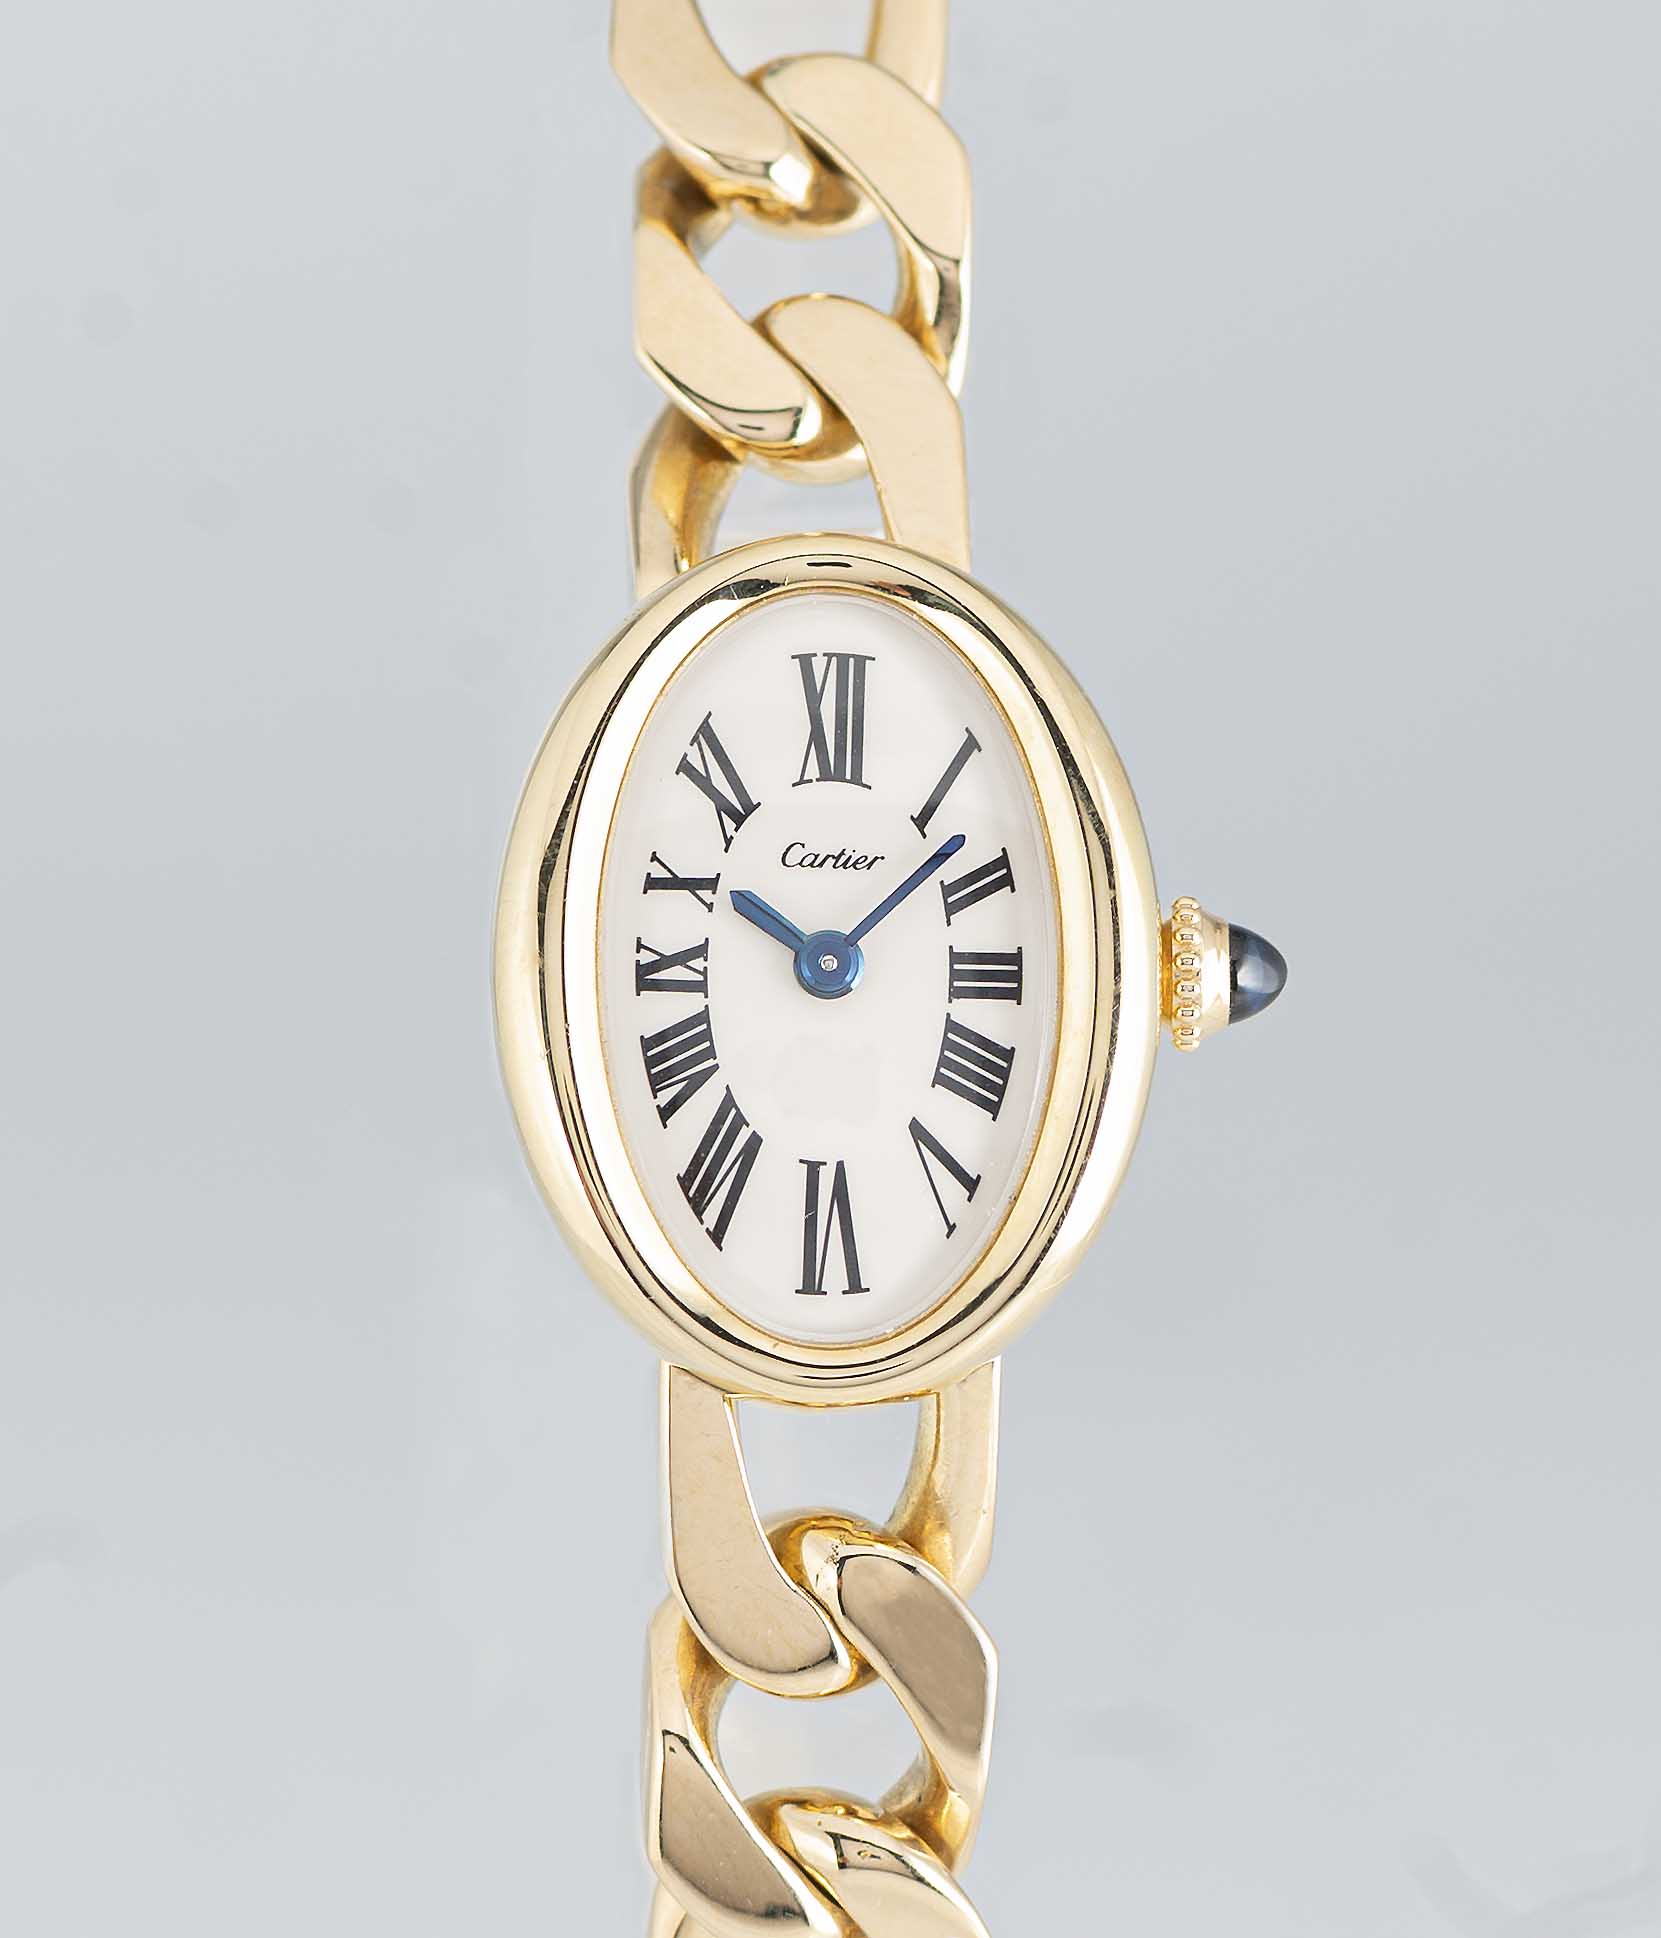 A RARE LADIES 18K SOLID GOLD CARTIER LONDON BAIGNOIRE BRACELET WATCH CIRCA 1971, WITH MATCHING - Image 3 of 11